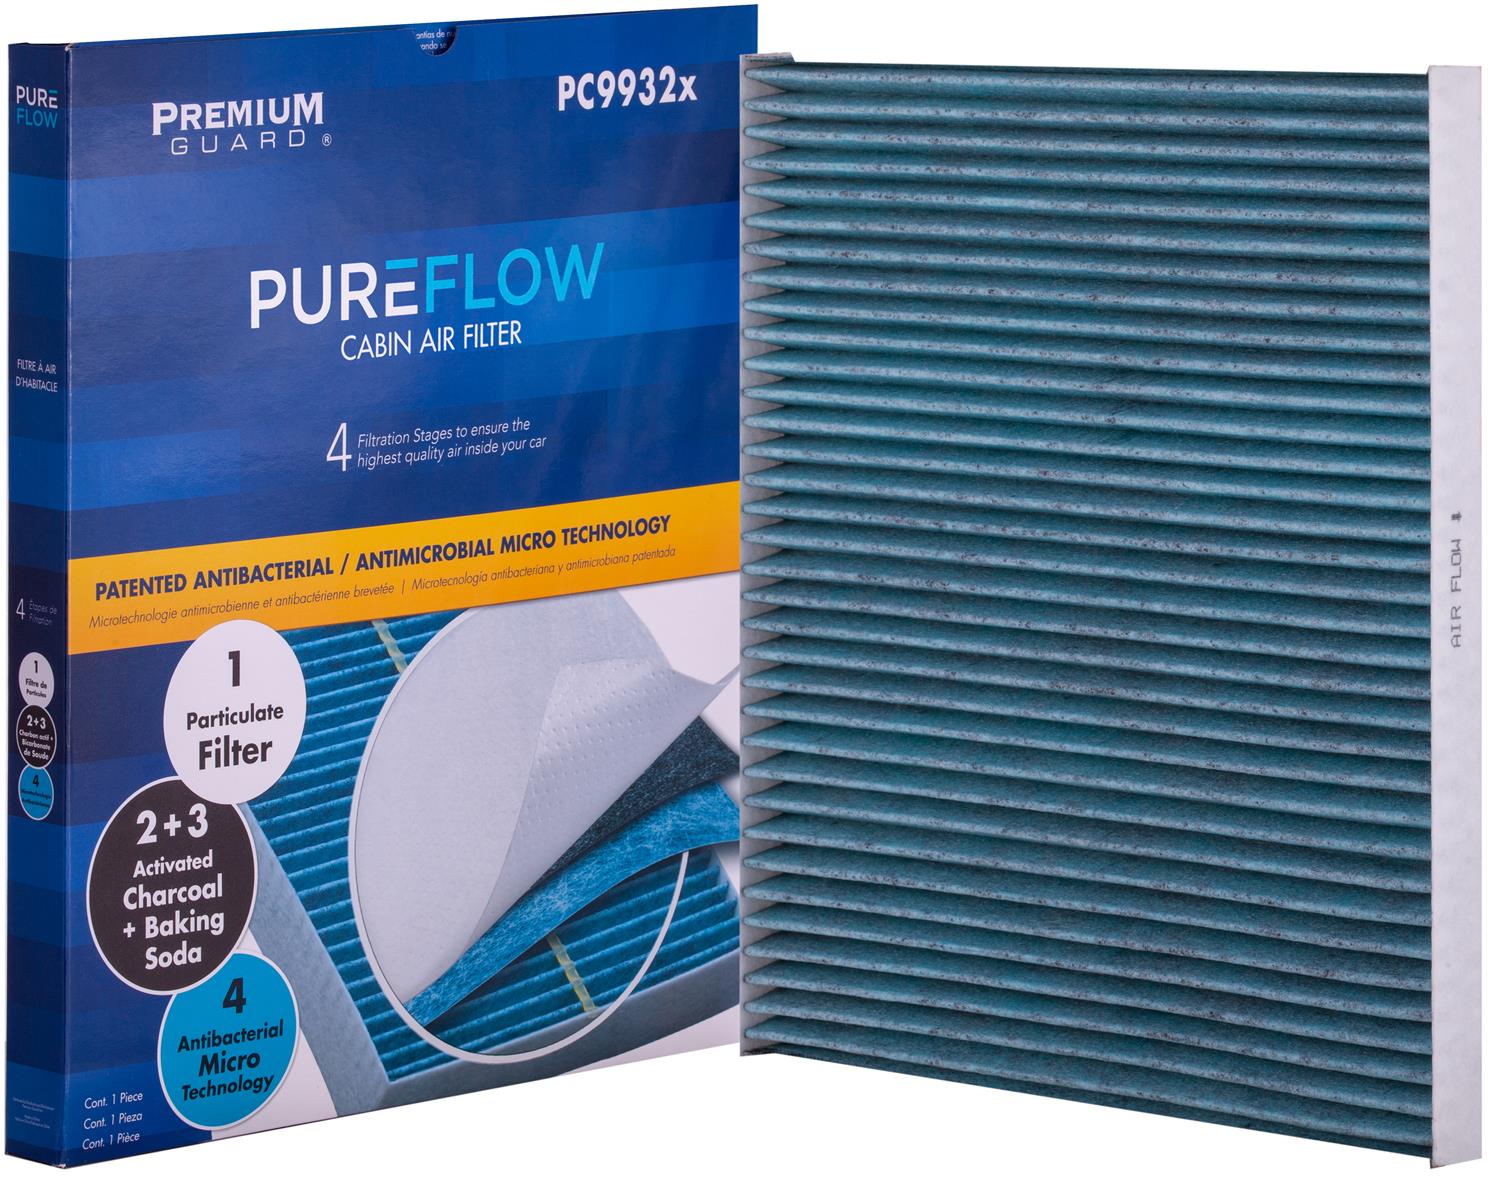 PUREFLOW 2018 Nissan Maxima Cabin Air Filter with Antibacterial Technology, PC9932X